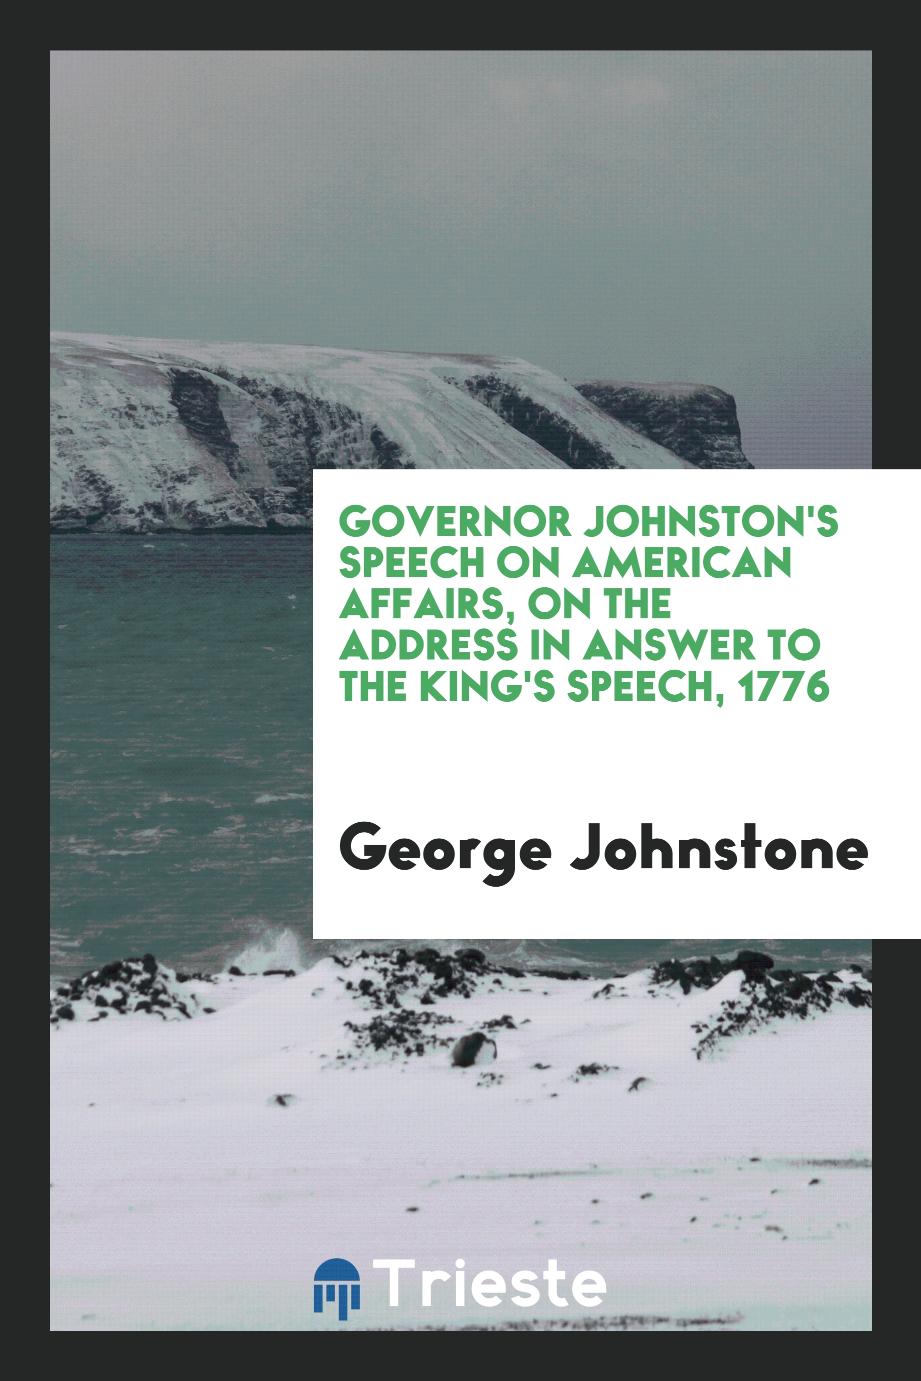 Governor Johnston's speech on American affairs, on the Address in answer to the King's speech, 1776